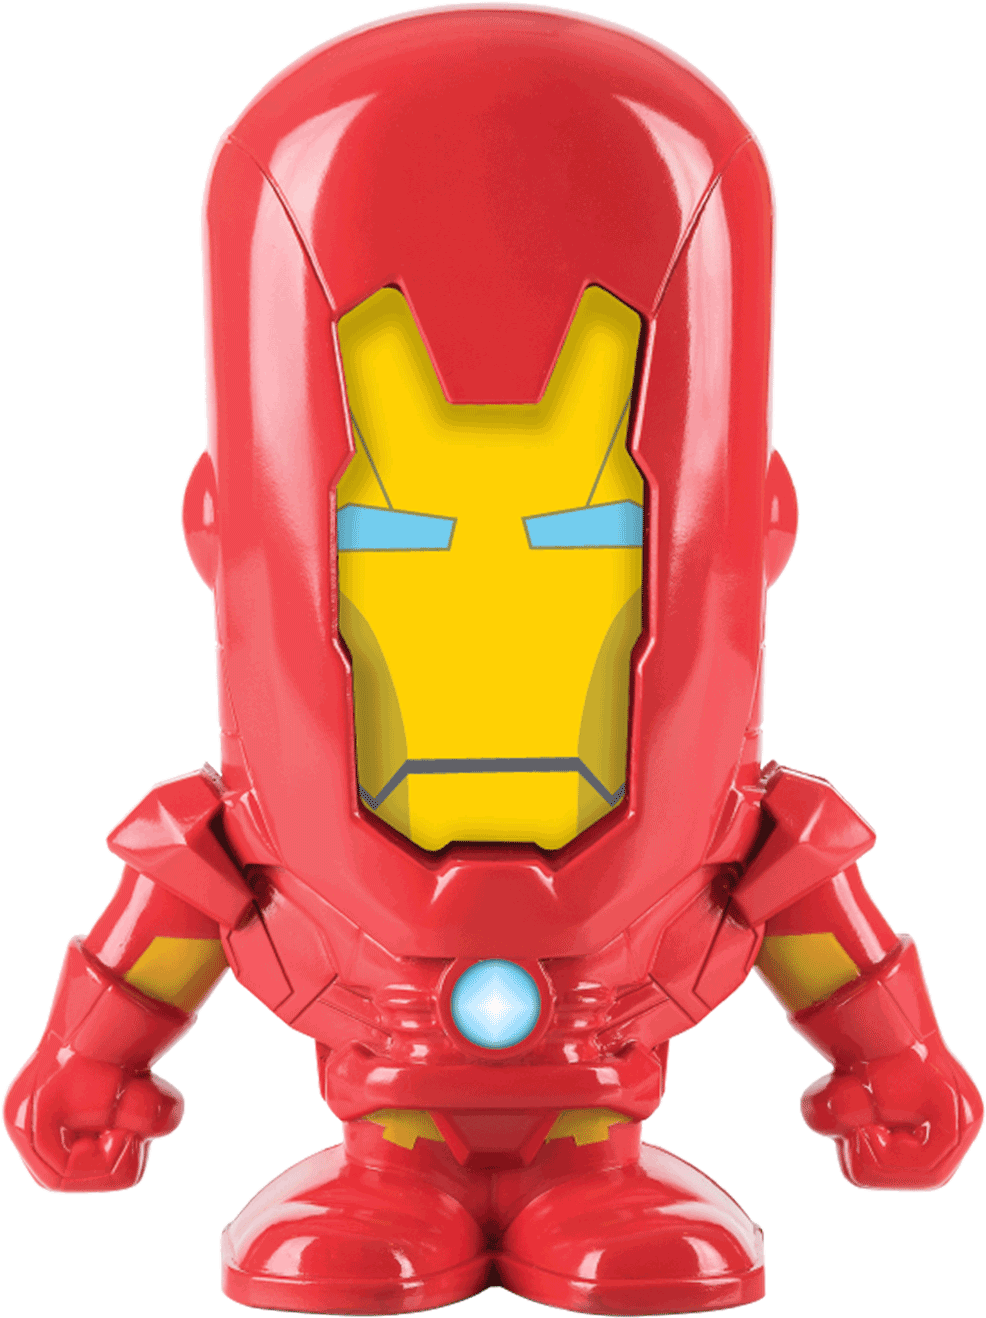 Avengers Iron Man And Captain America And Will Entertain - App Dudes Iron Man Smartphone Stand (1200x1500)